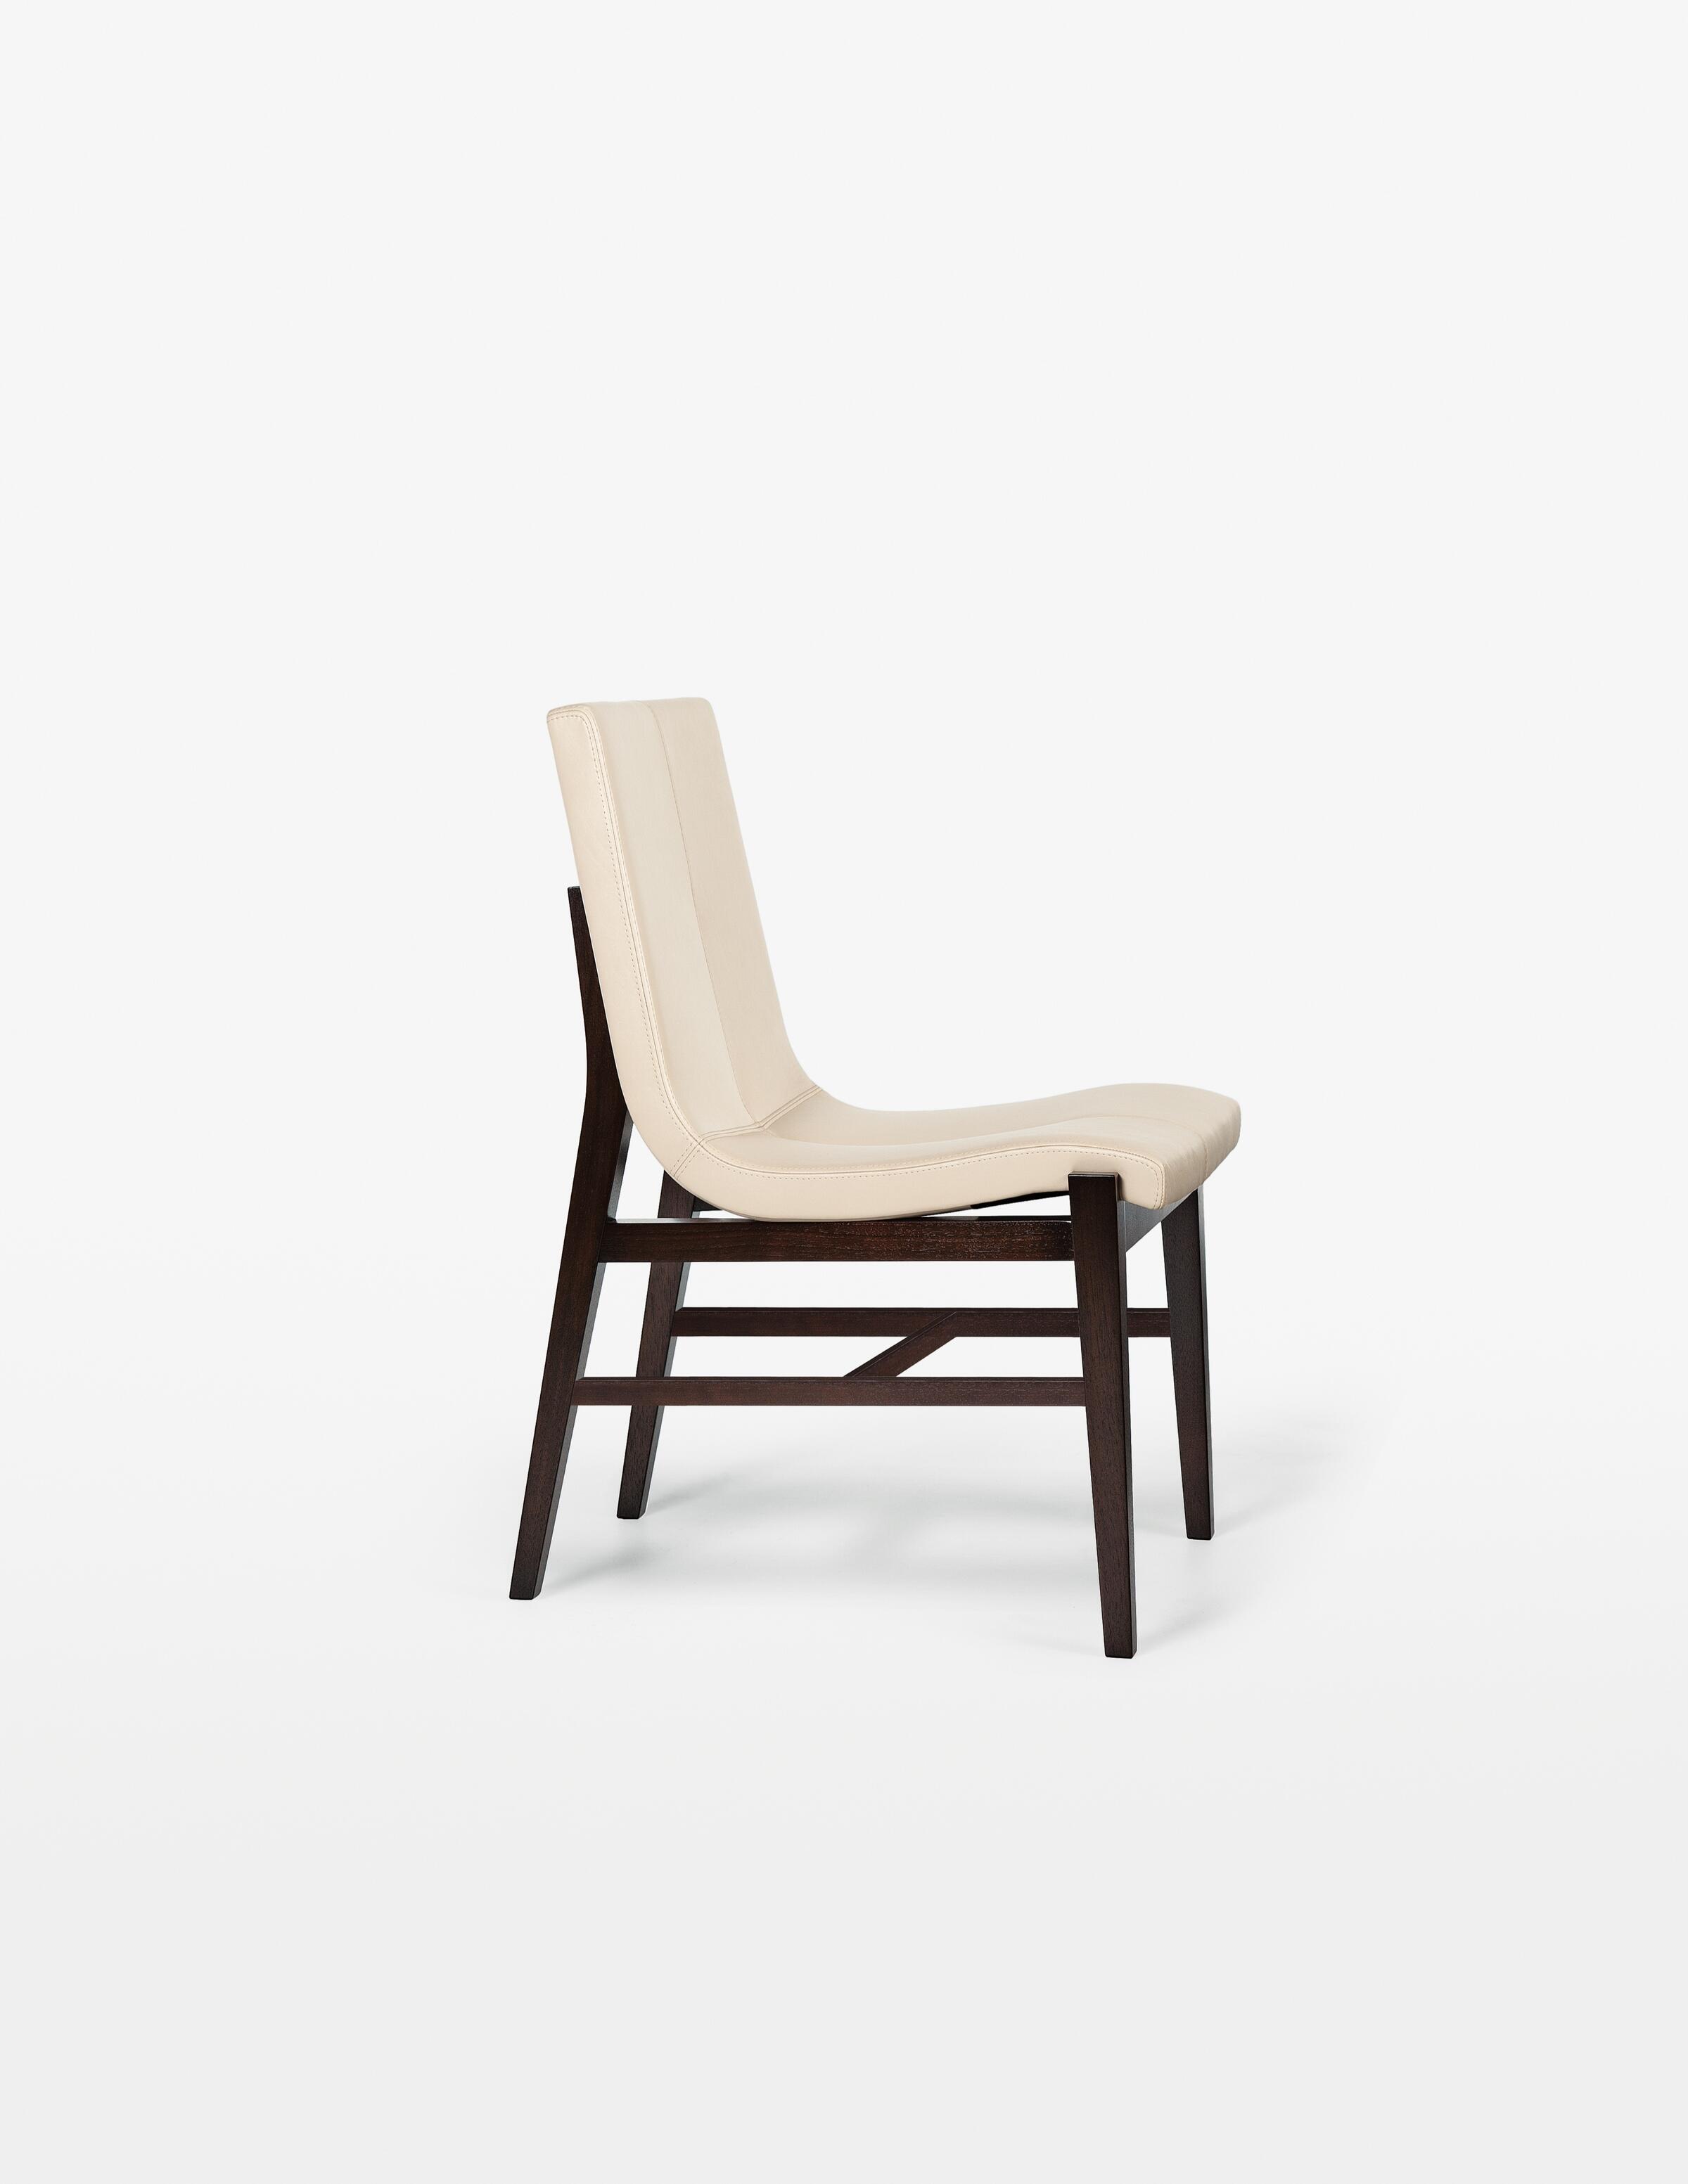 Siren Dining Side Chair with stretcher